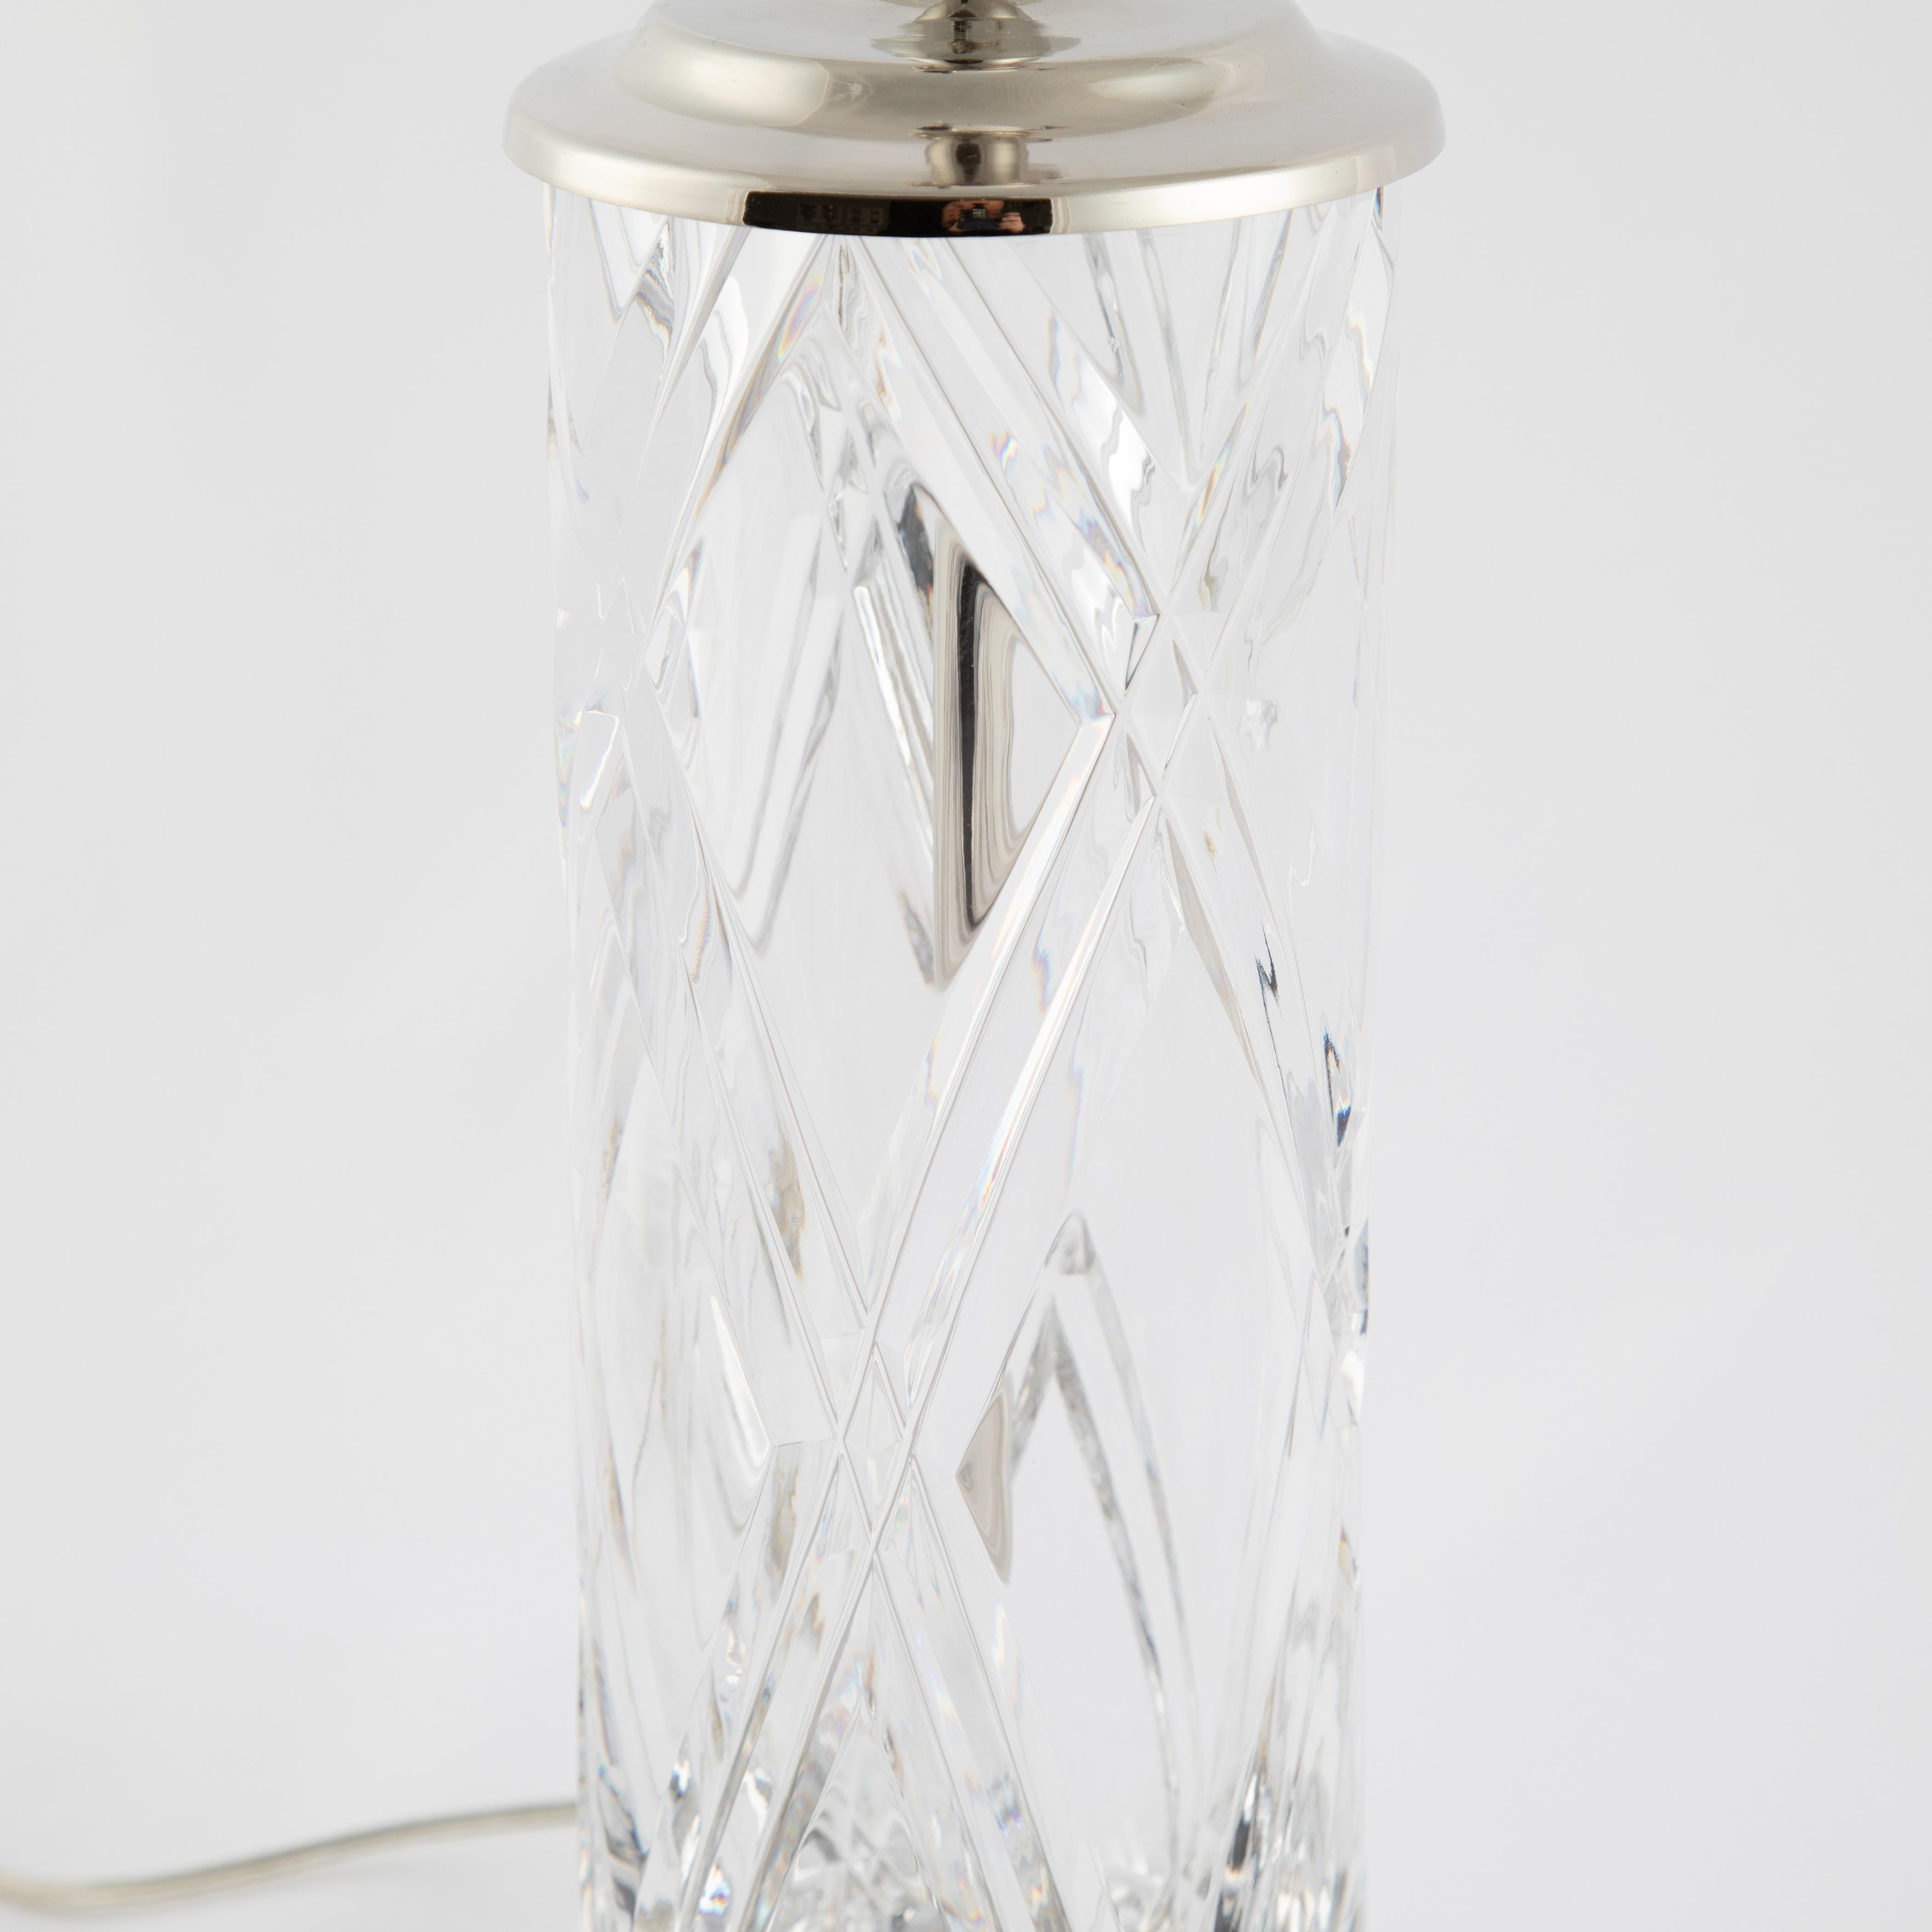 Hand-Carved Olle Alberius for Orrefors Handcut Crystal Table Lamps, circa 1970s For Sale